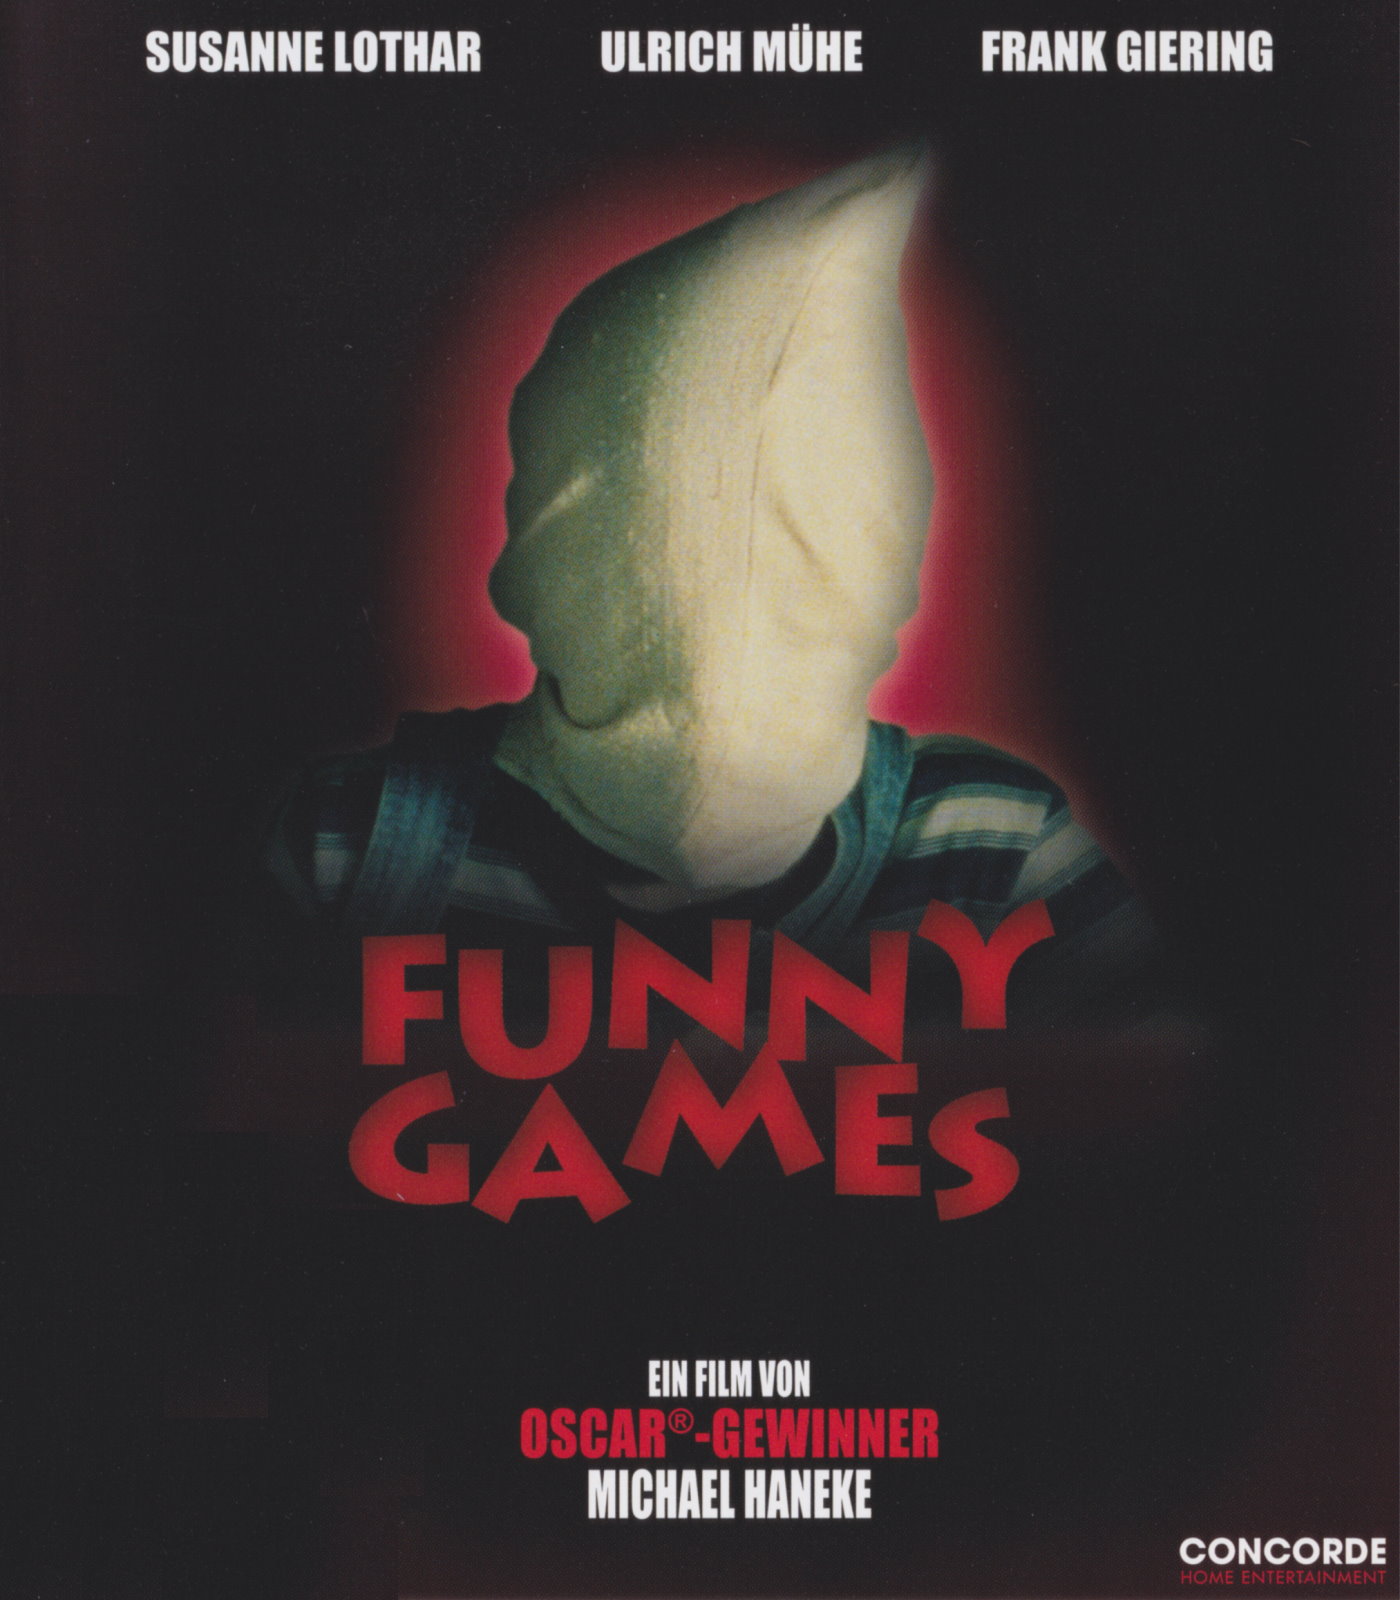 Cover - Funny Games.jpg